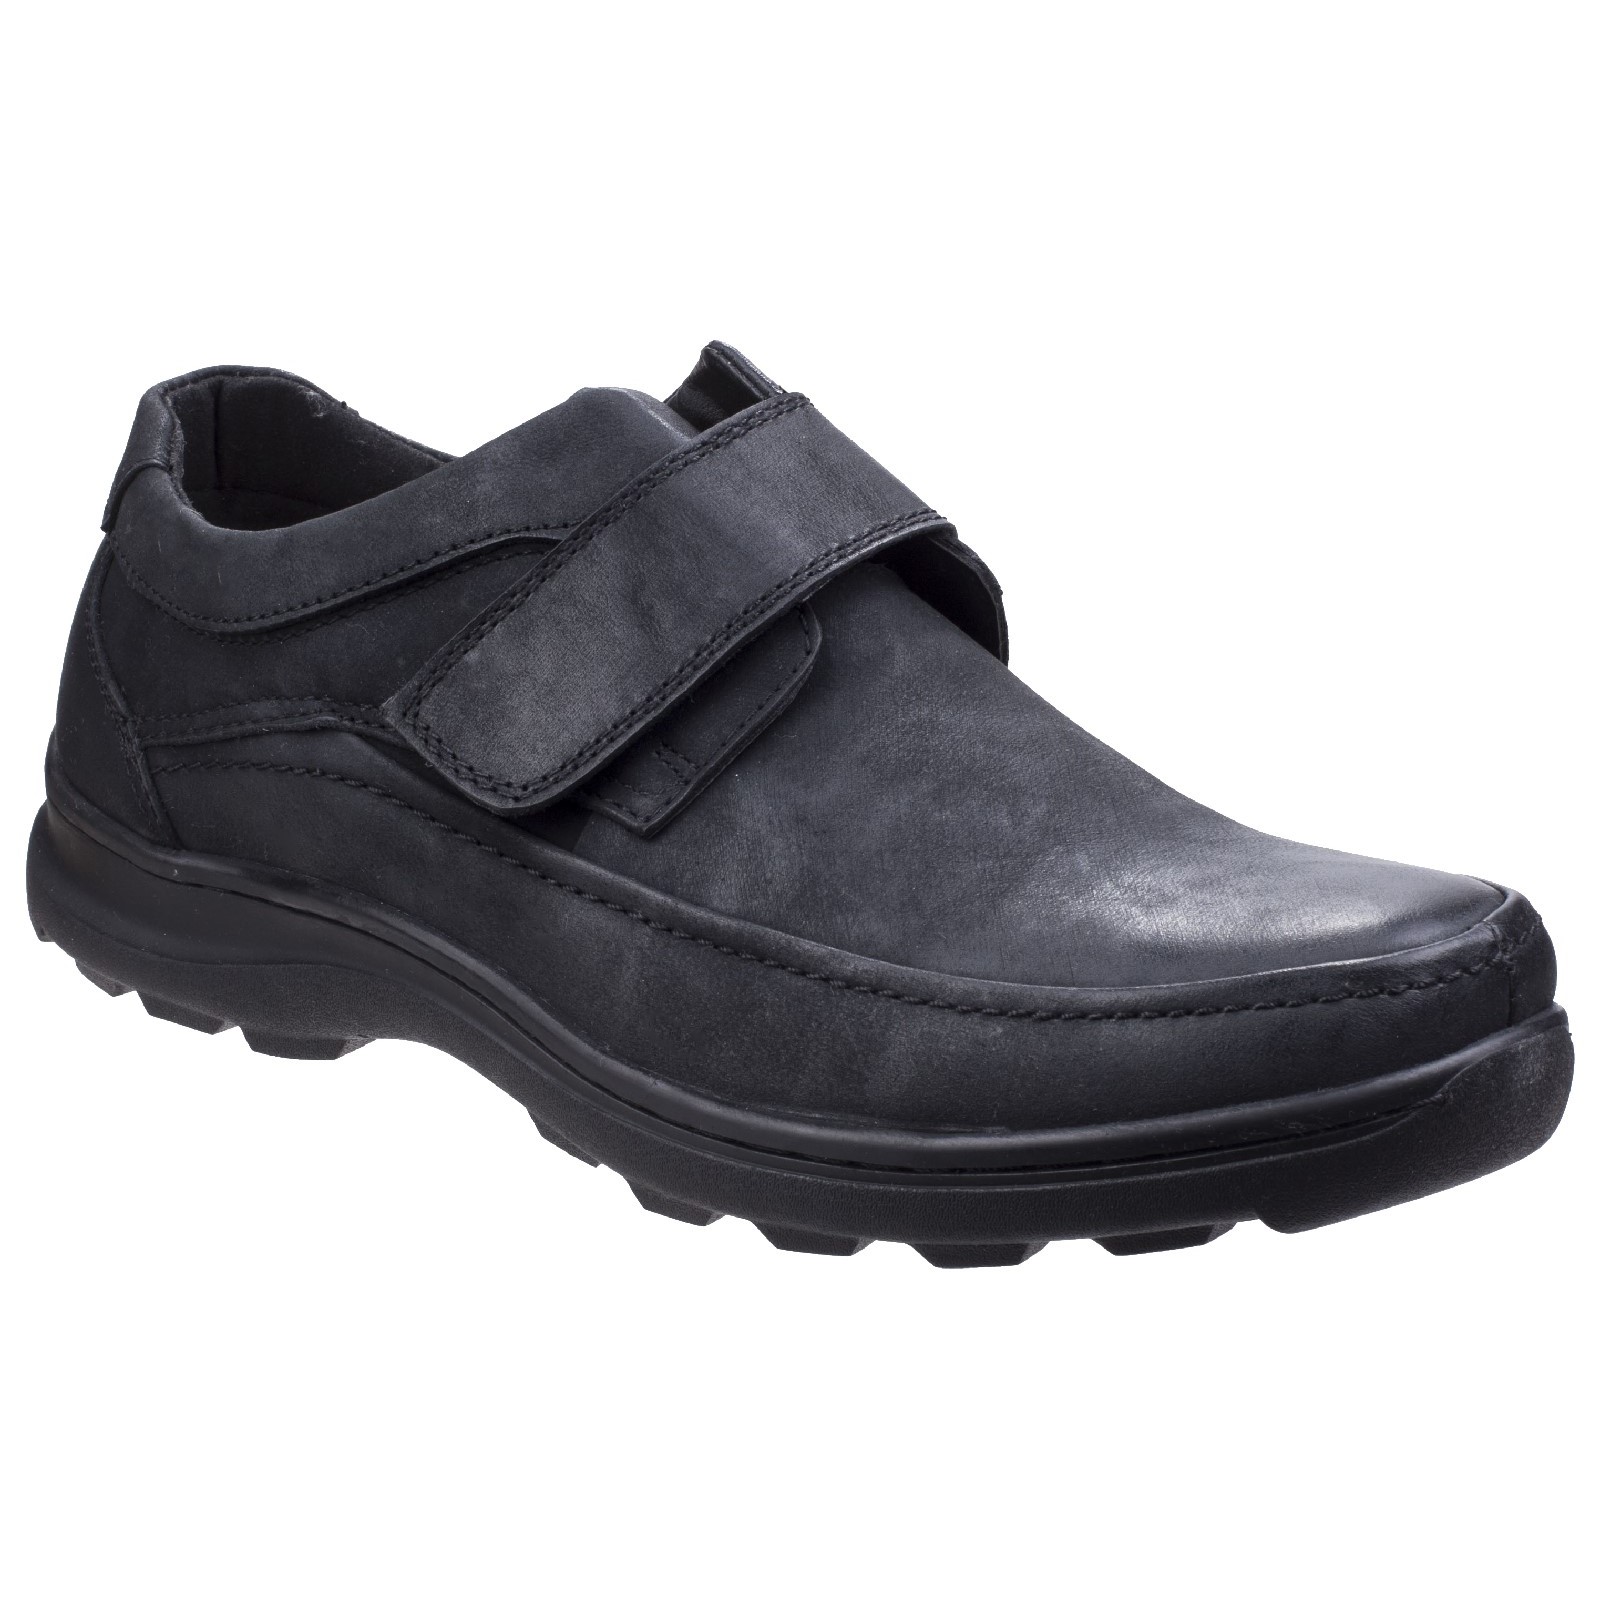 Hurghada Touch Fastening Shoe